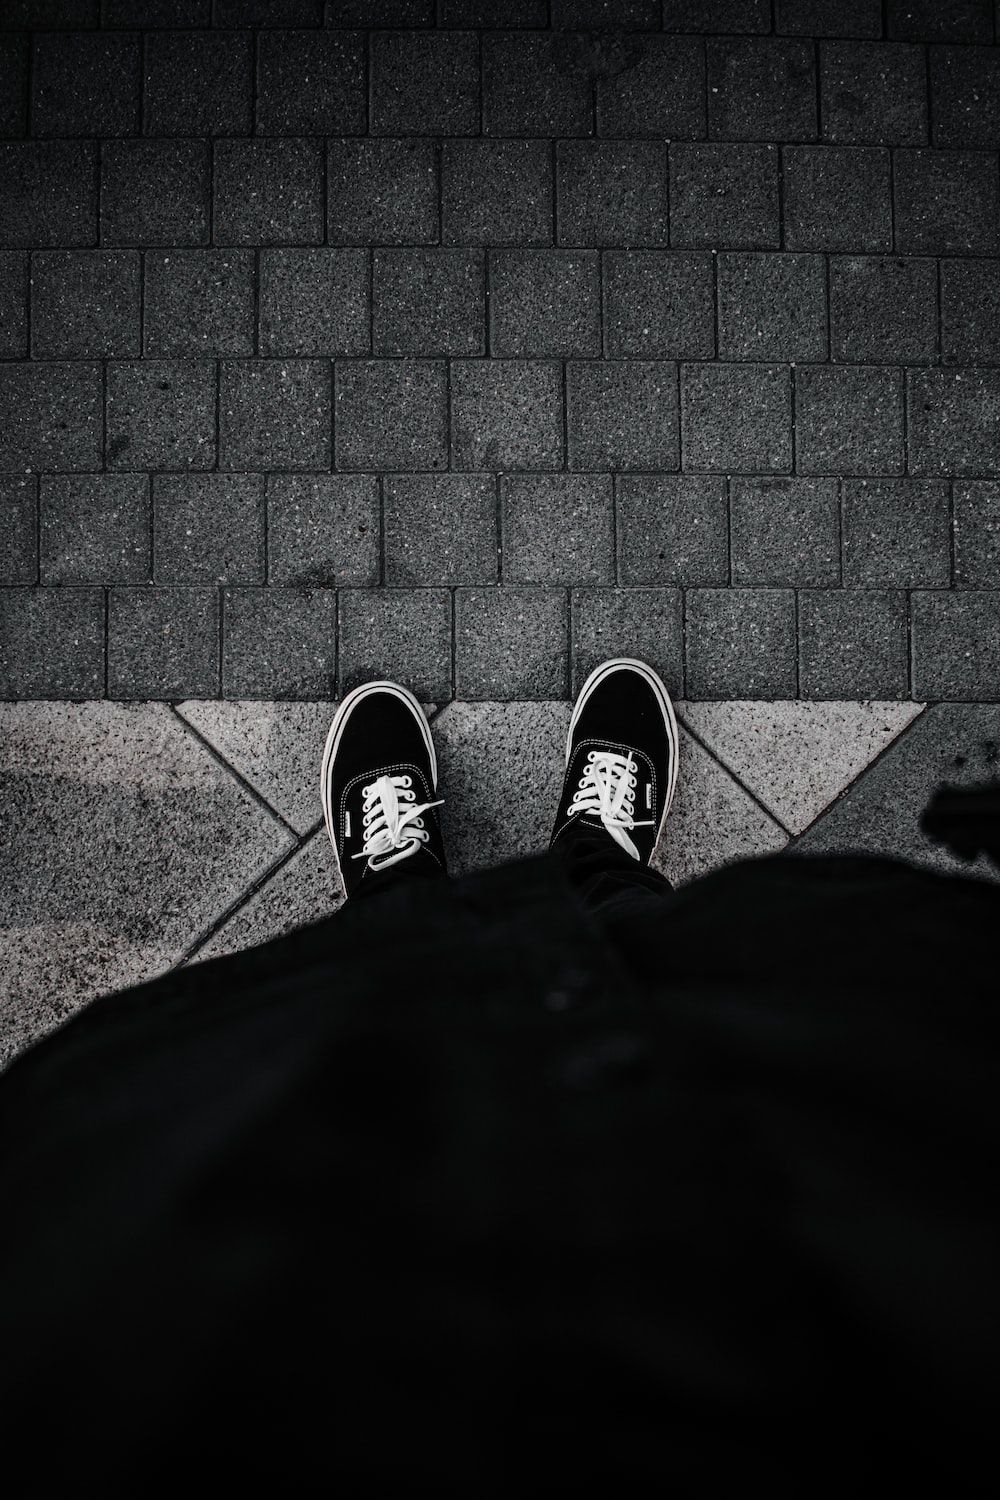 A person wearing black and white Vans sneakers standing on a sidewalk - Vans